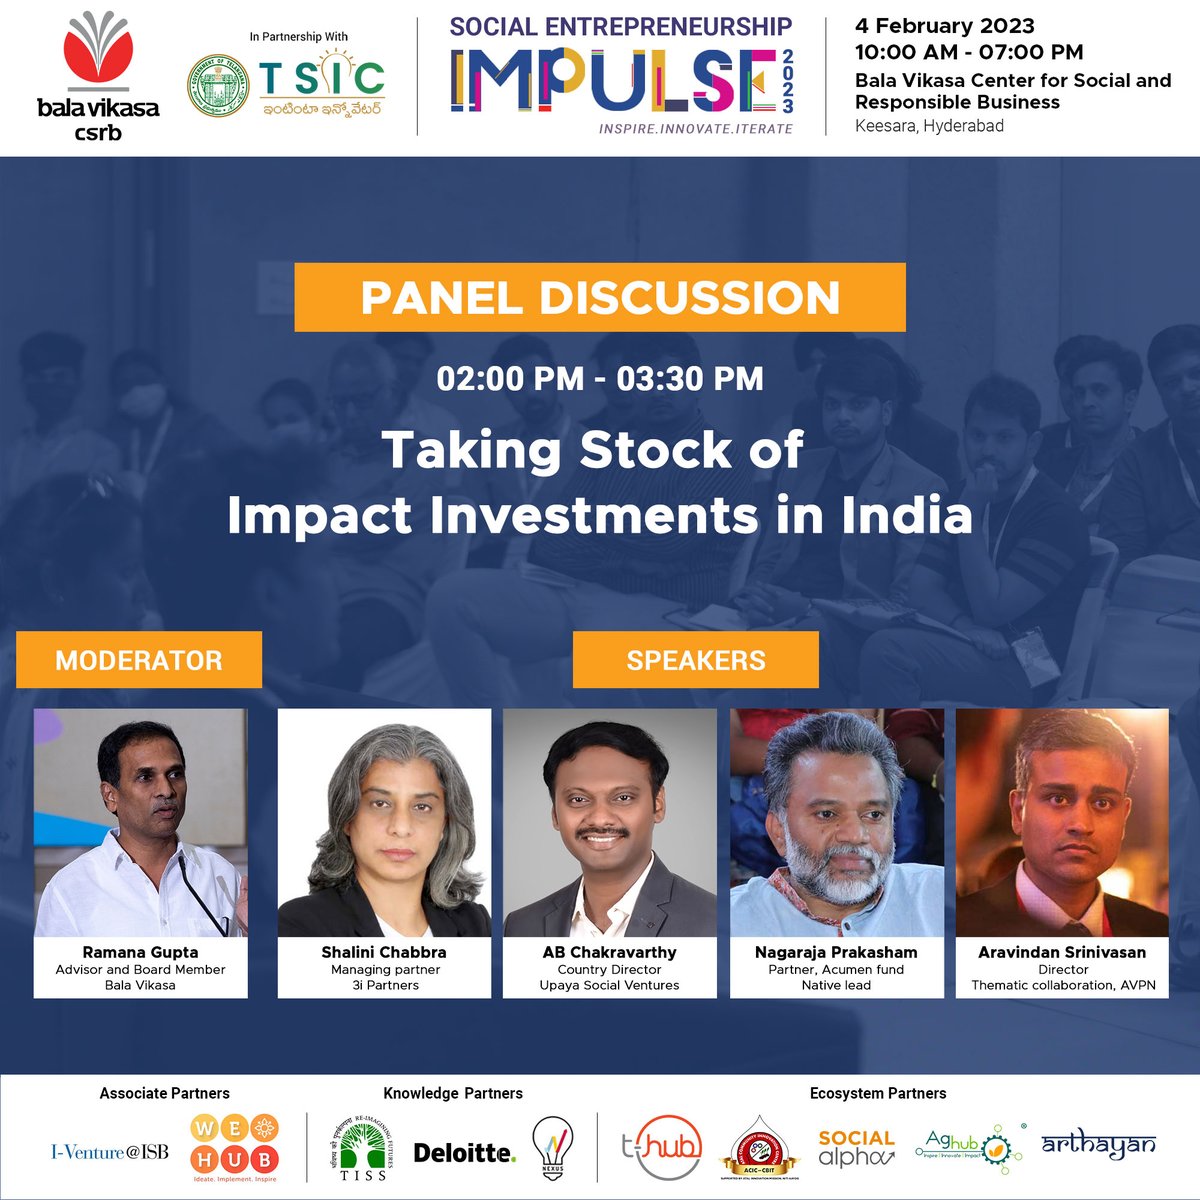 Taking Stock of Impact Investments in India
Gain valuable insights from leading #ImpactInvestors on how to attract investment for your #SocialEntrepreneurship.
Don't miss out on this opportunity to connect with industry experts. Join us now! 
#ImpactInvesting #ESG